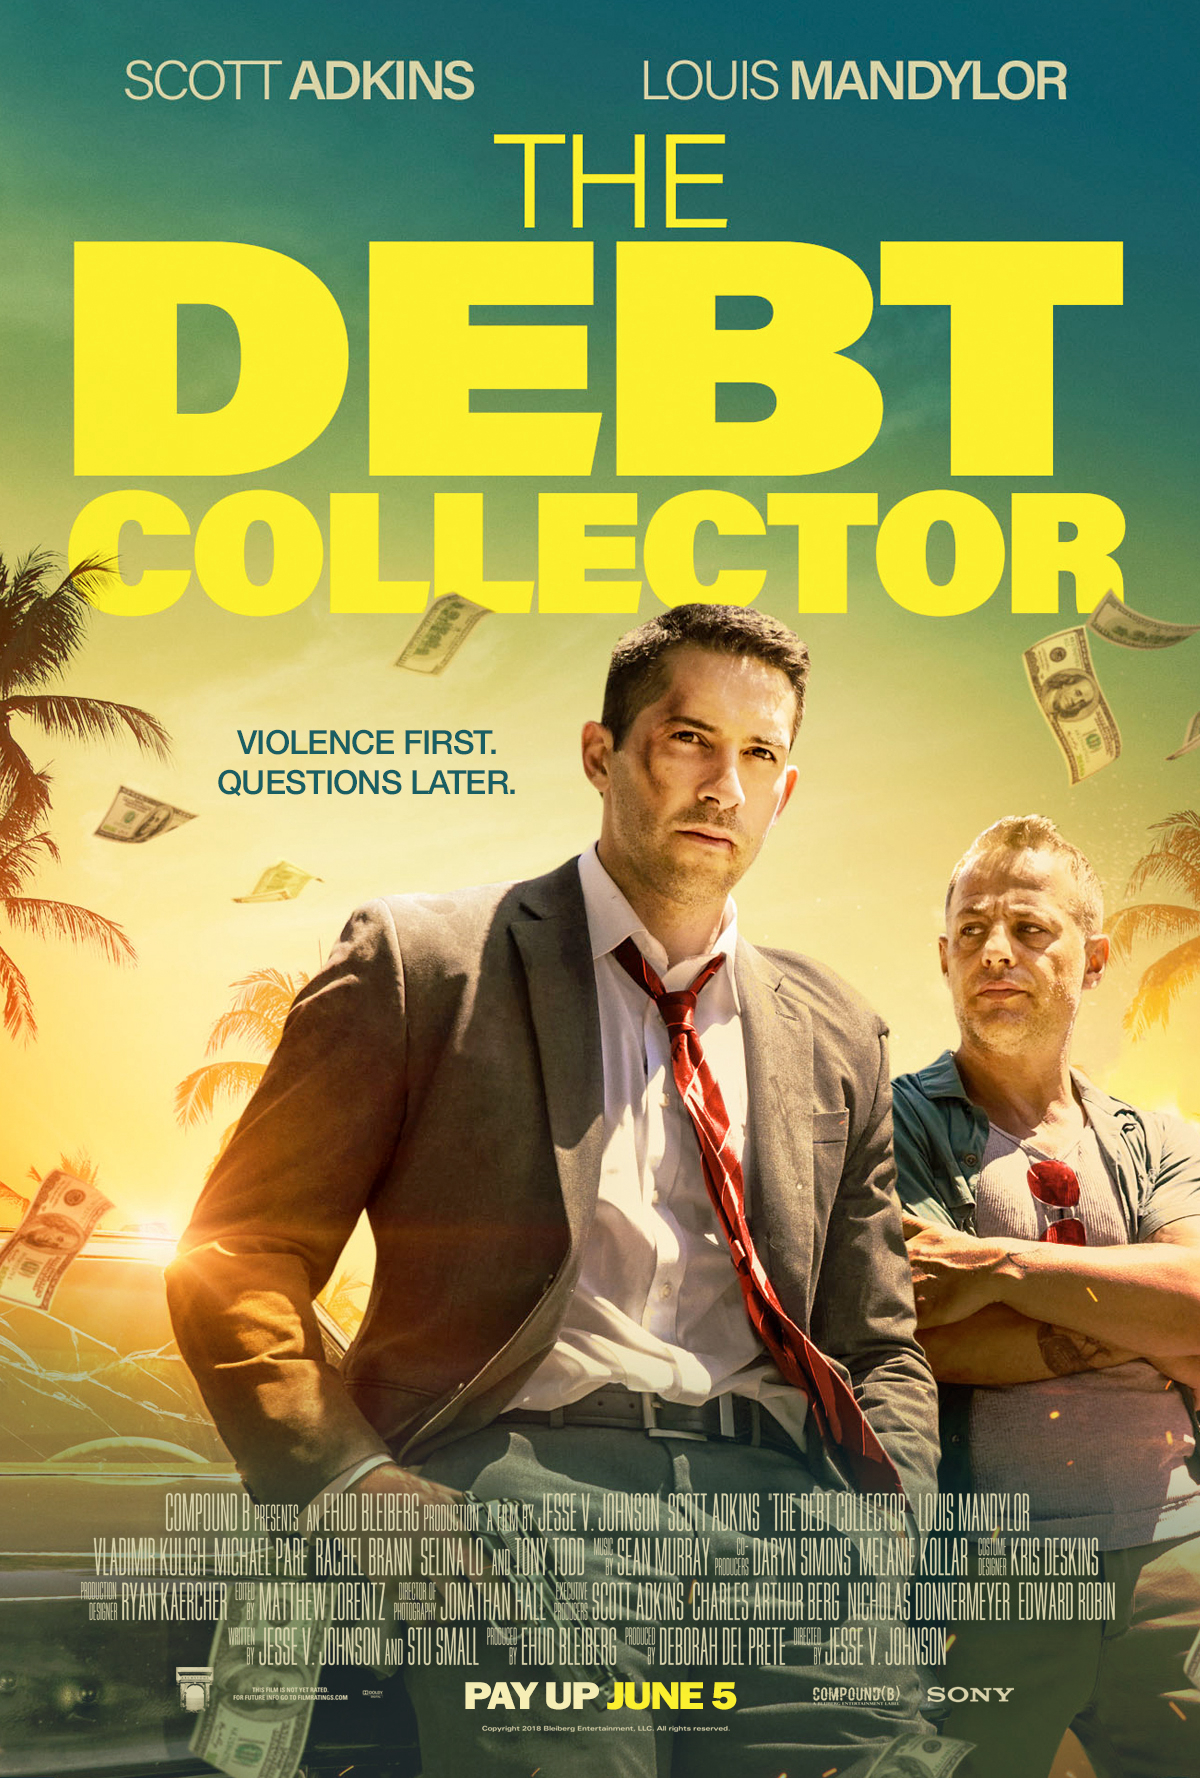 Poster Phim Kẻ Thu Nợ (The Debt Collector)